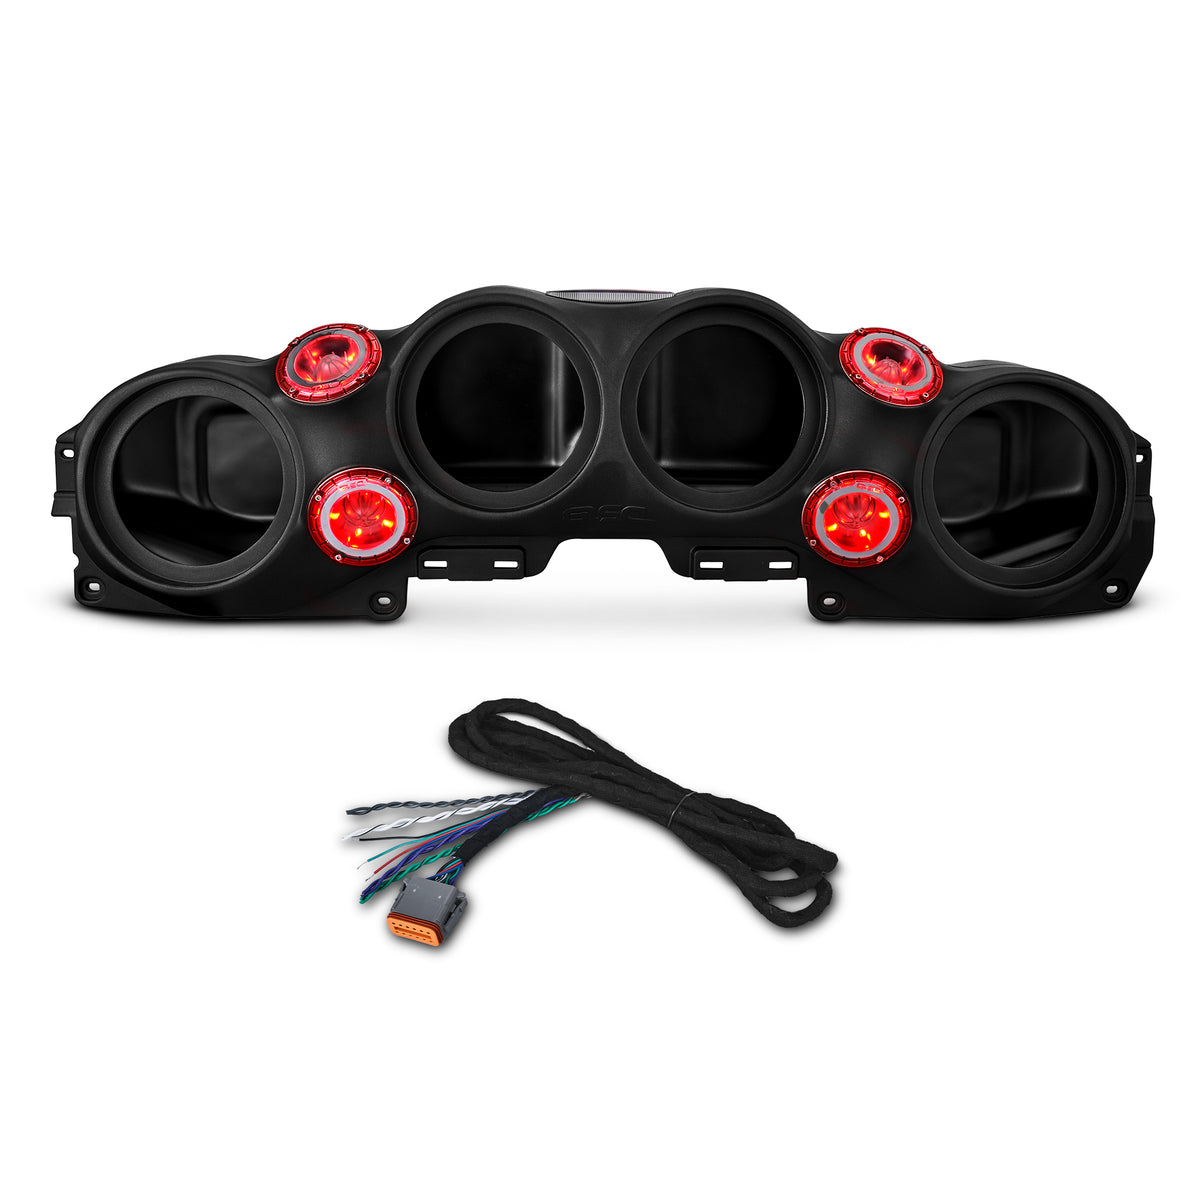 Jeep JL/JLU,JT Overhead Bar System Fits 4 X 8" Speakers (Not Included) and 4 X Tweeters PRO-TW4L and Harness Included - Black